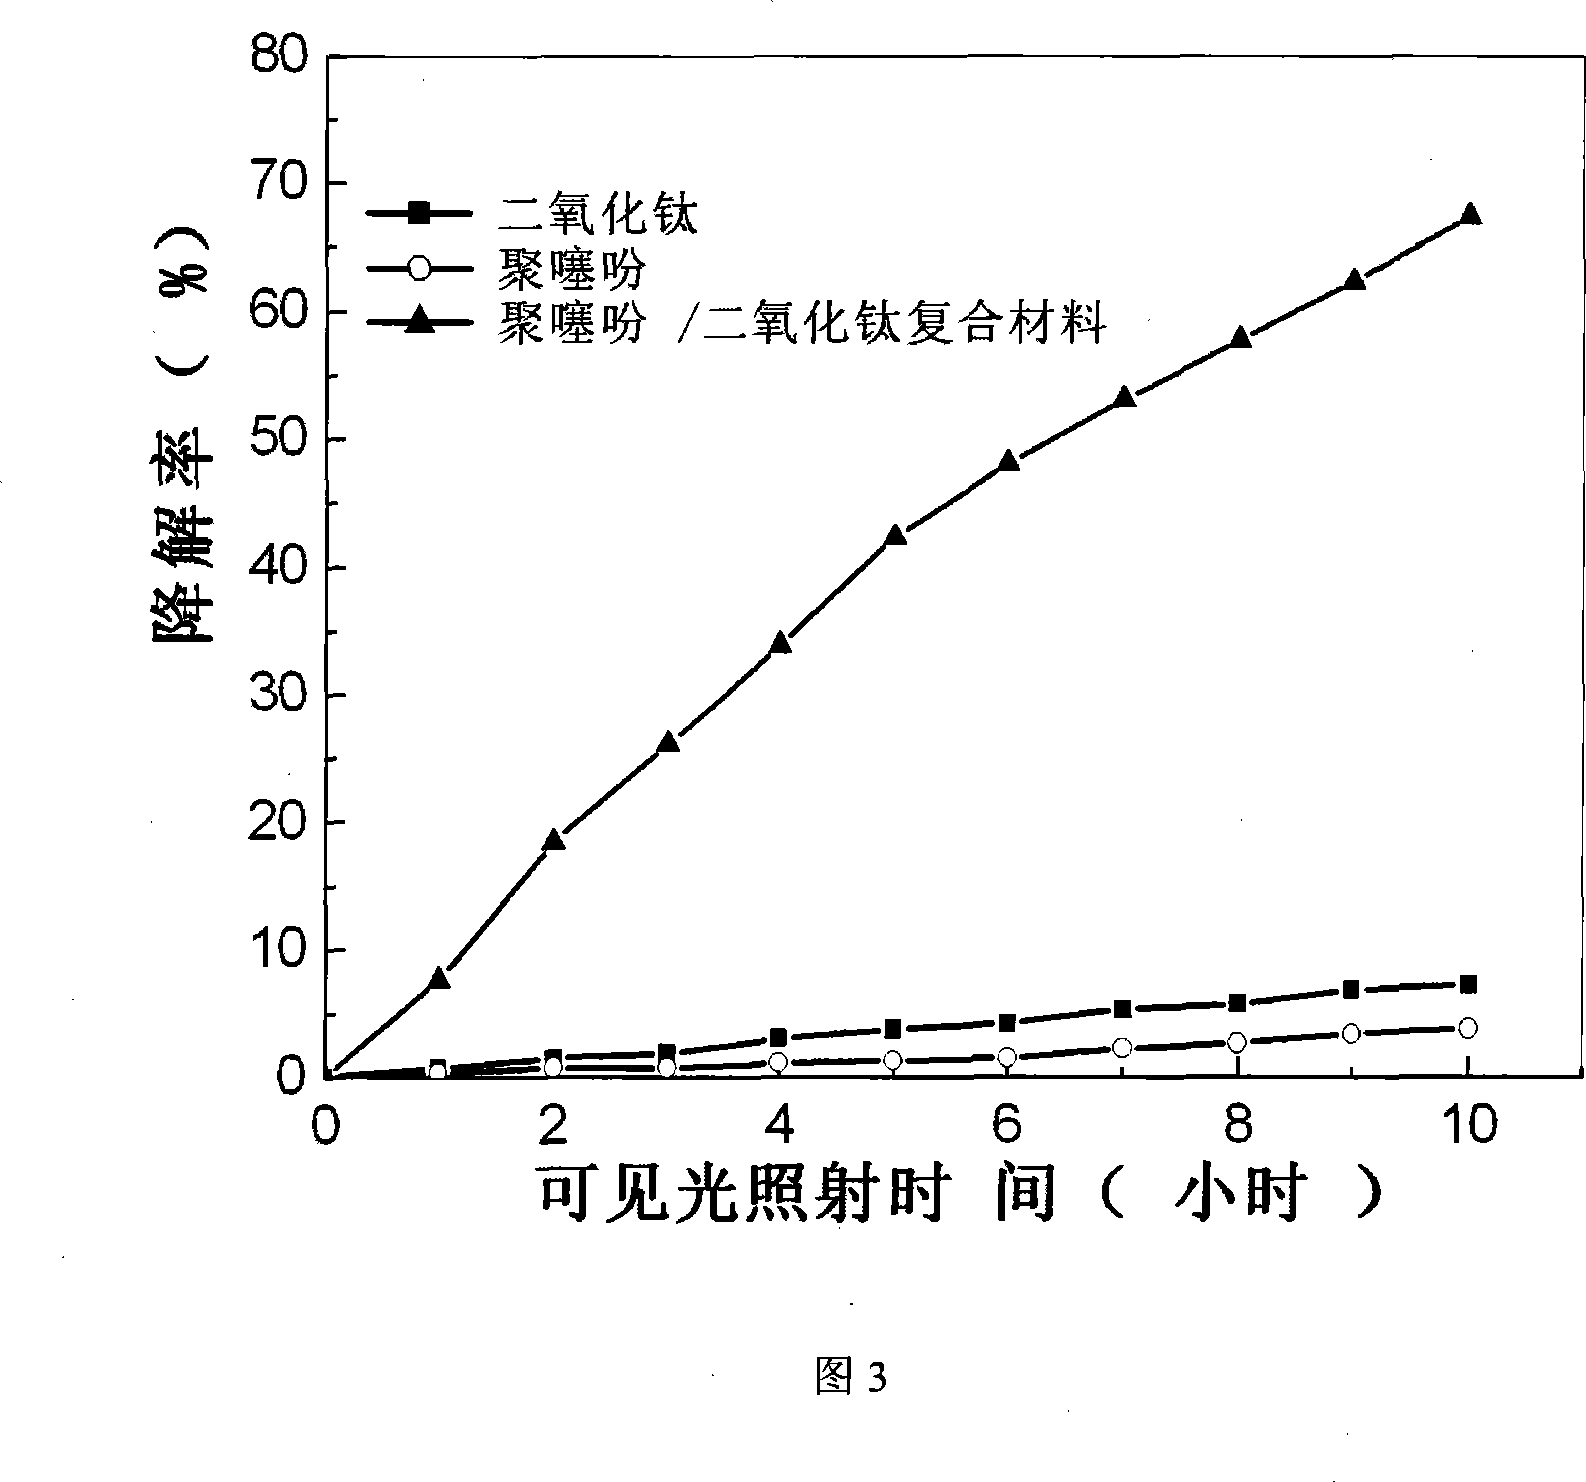 Composite photo-catalytic material with visible light catalytic activity and preparation thereof